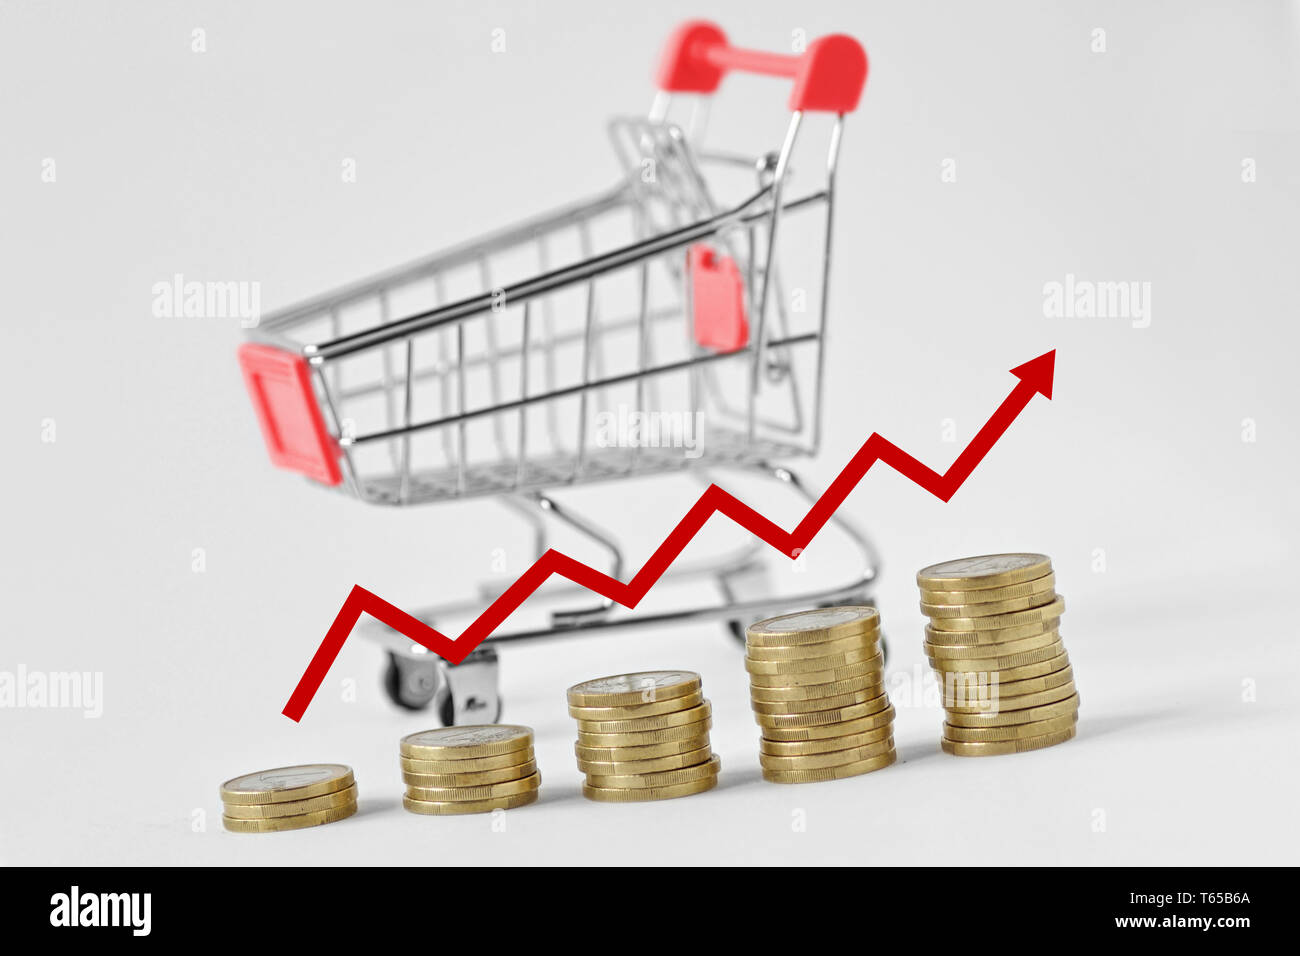 Pile of coins with arrow and shopping cart on the background - Concept of increasing purchases Stock Photo